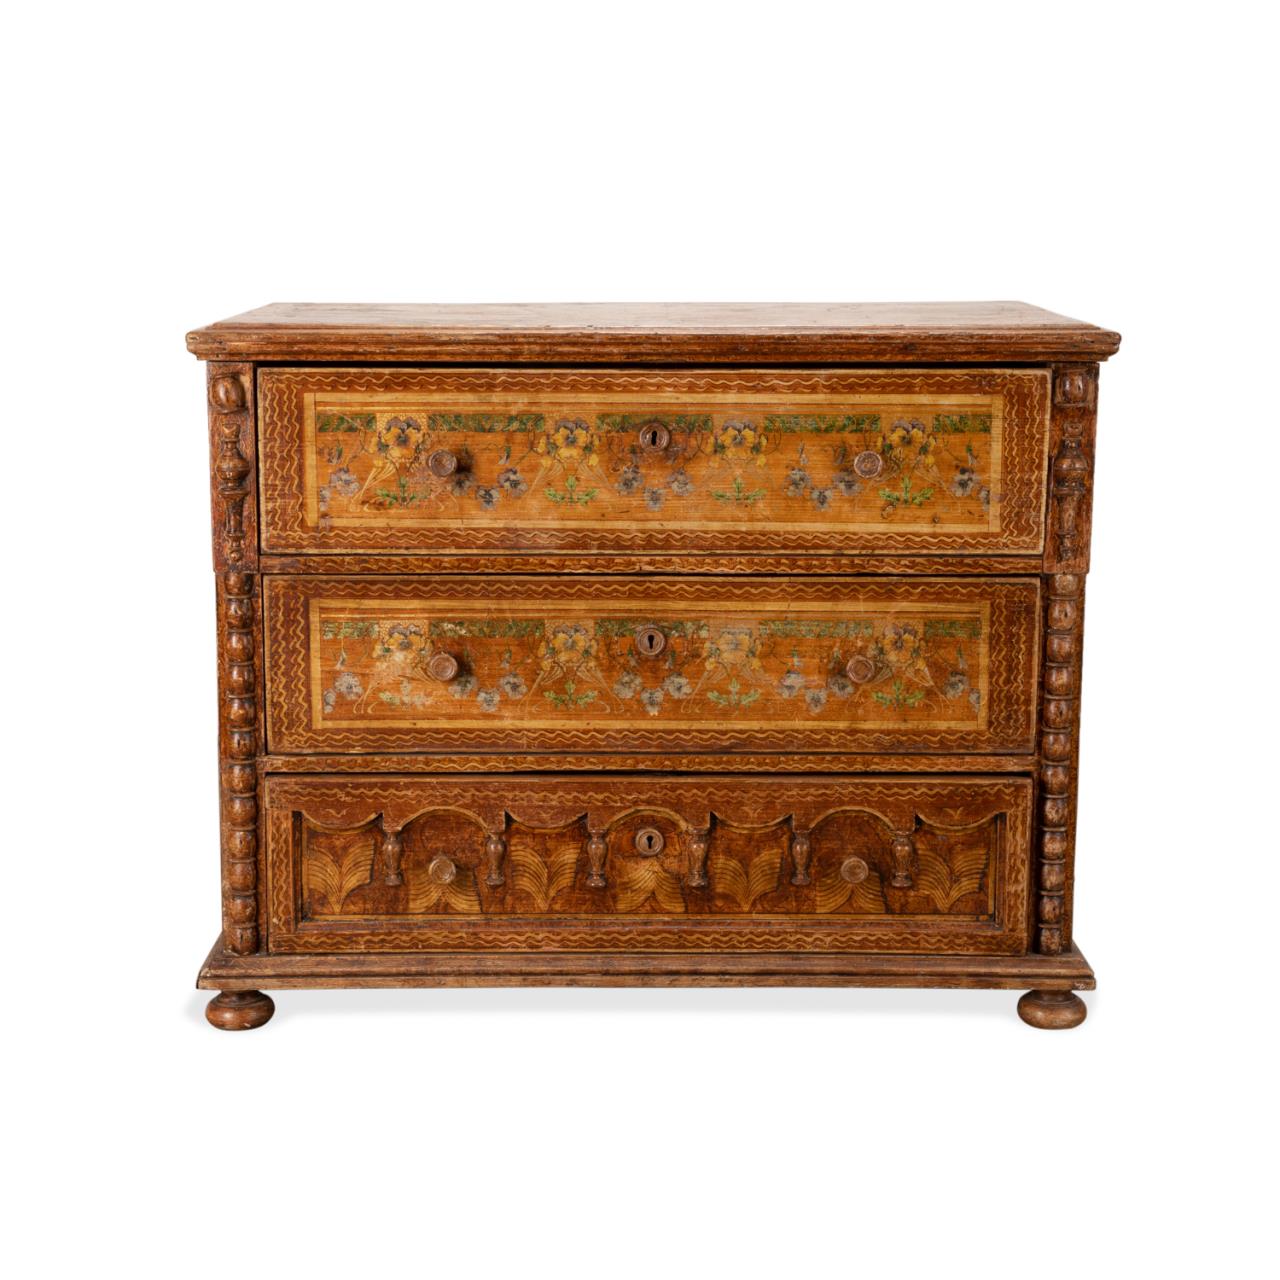 CONTINENTAL FLORAL PAINTED PINE 2fa416